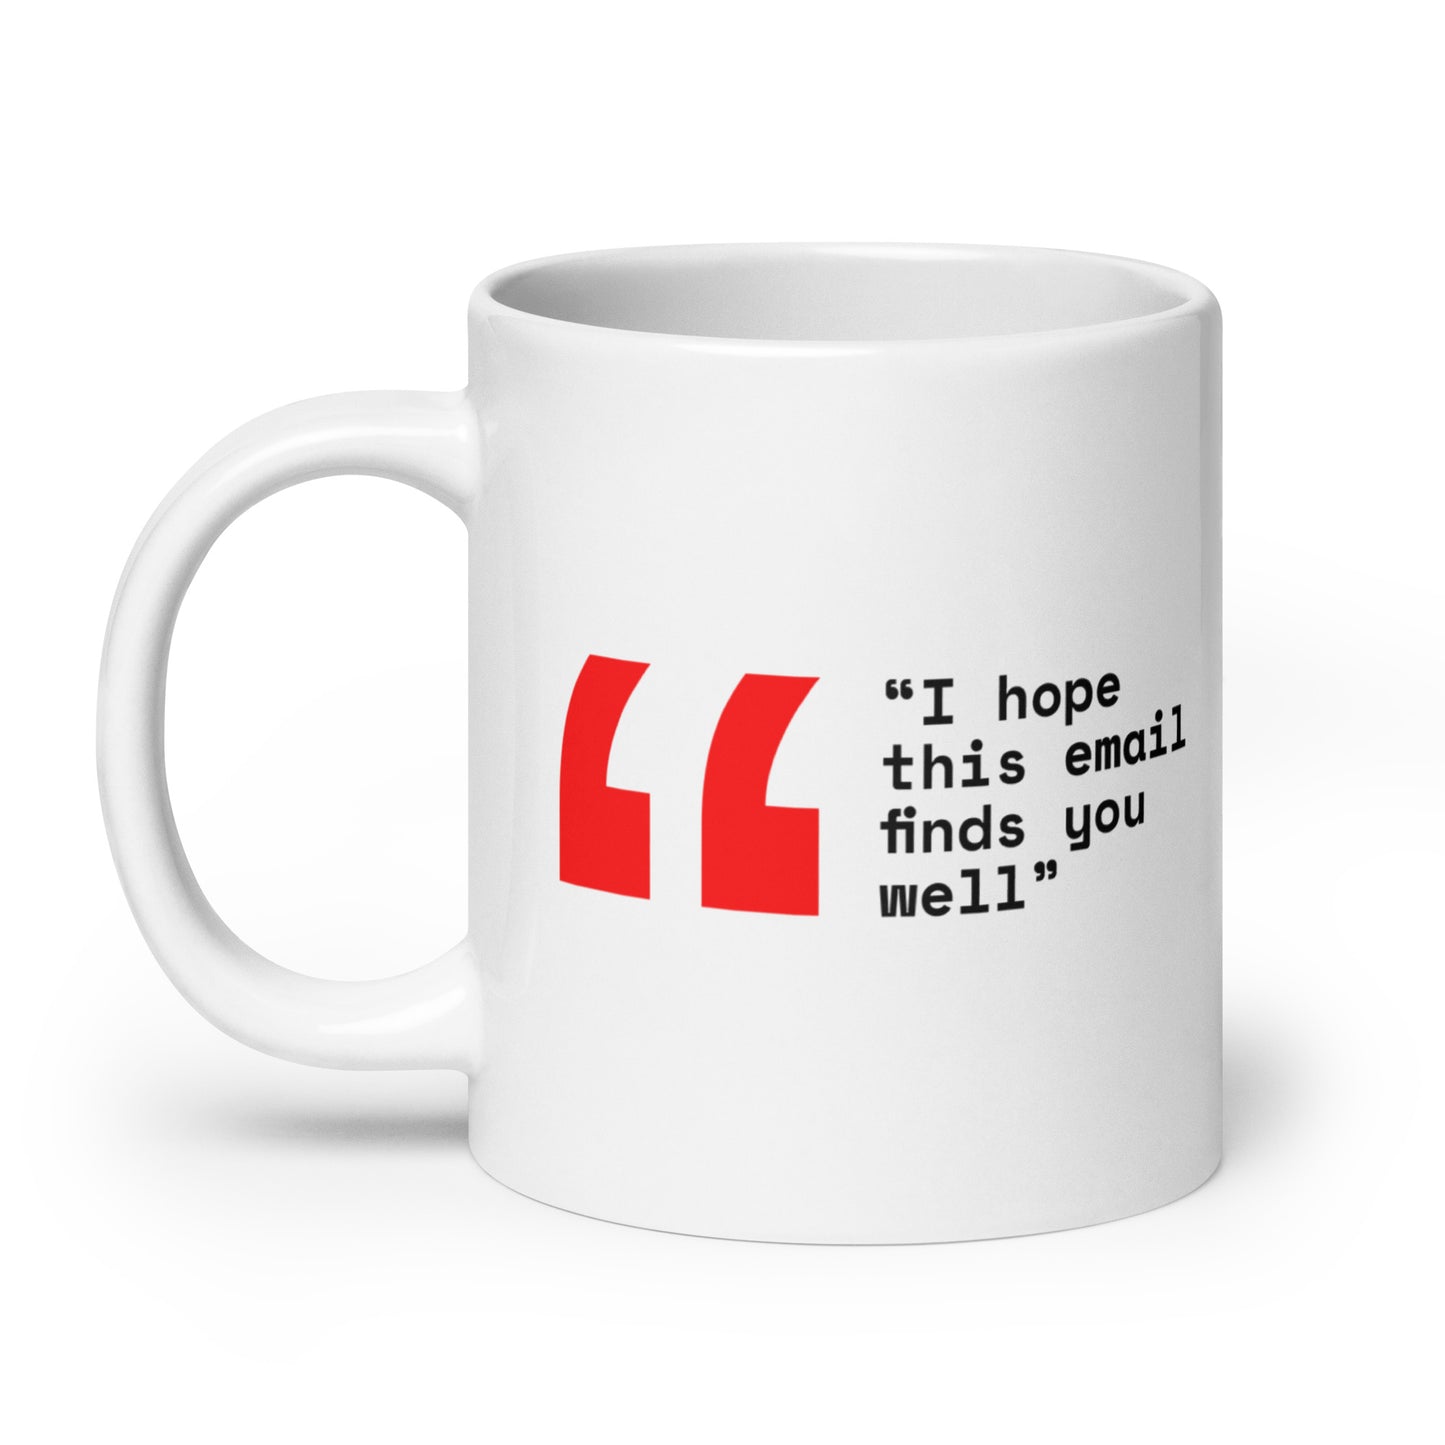 I hope this email finds you well mug (20oz)